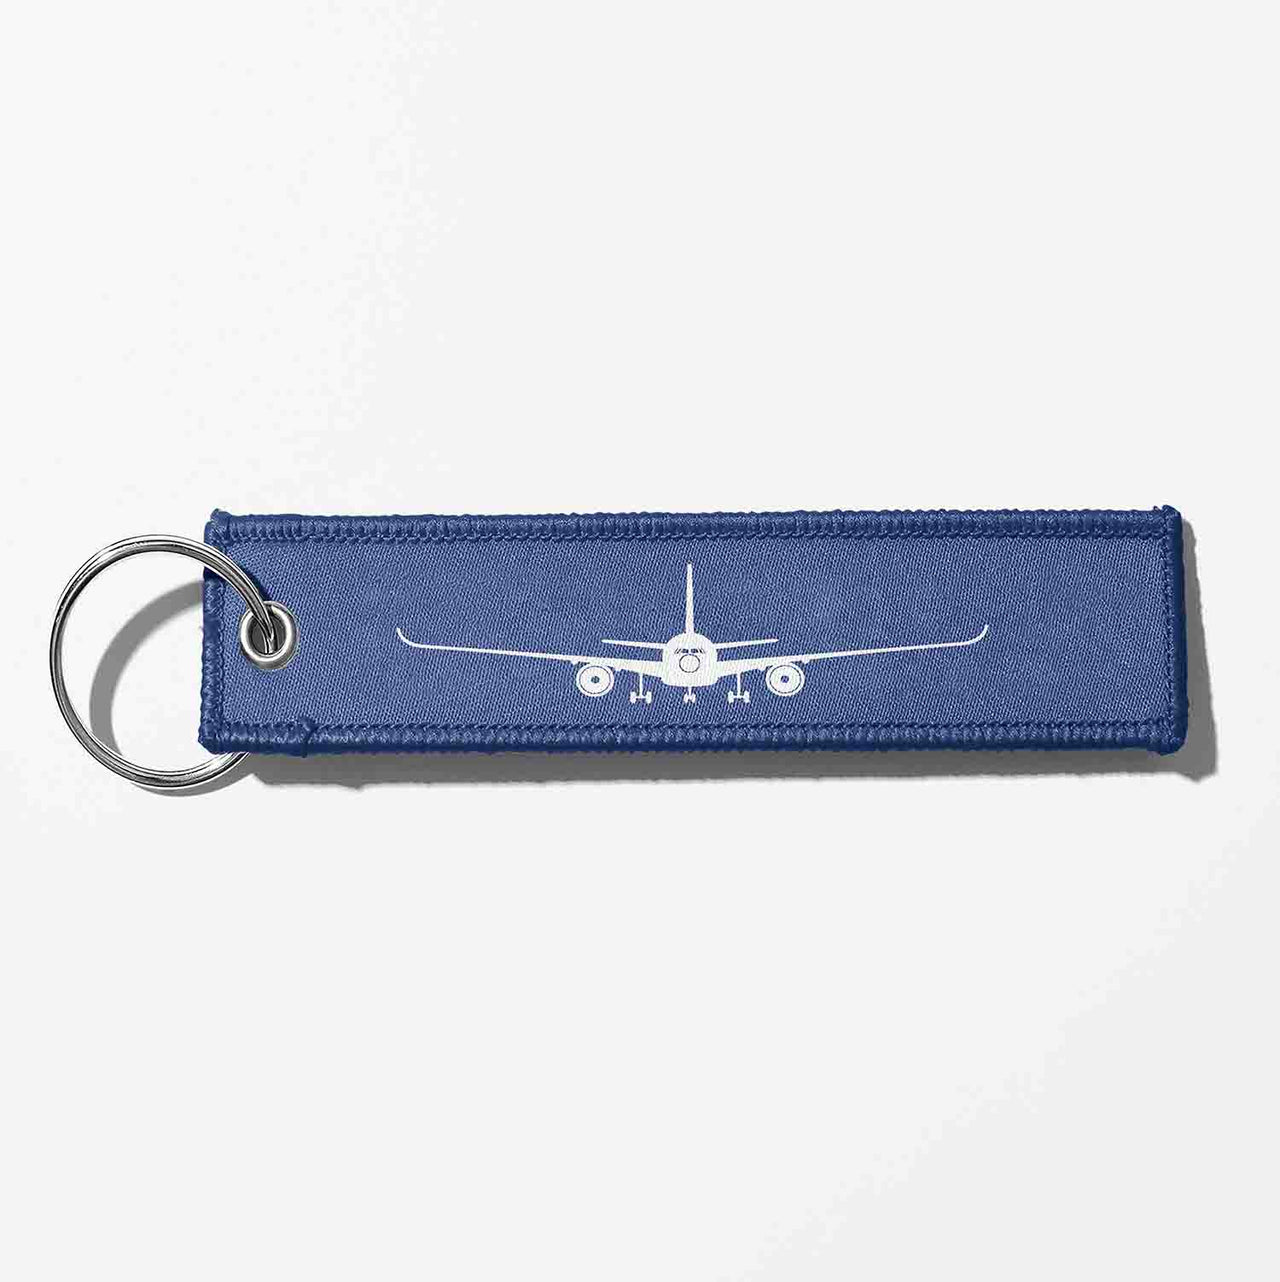 Airbus A350 Silhouette Designed Key Chains